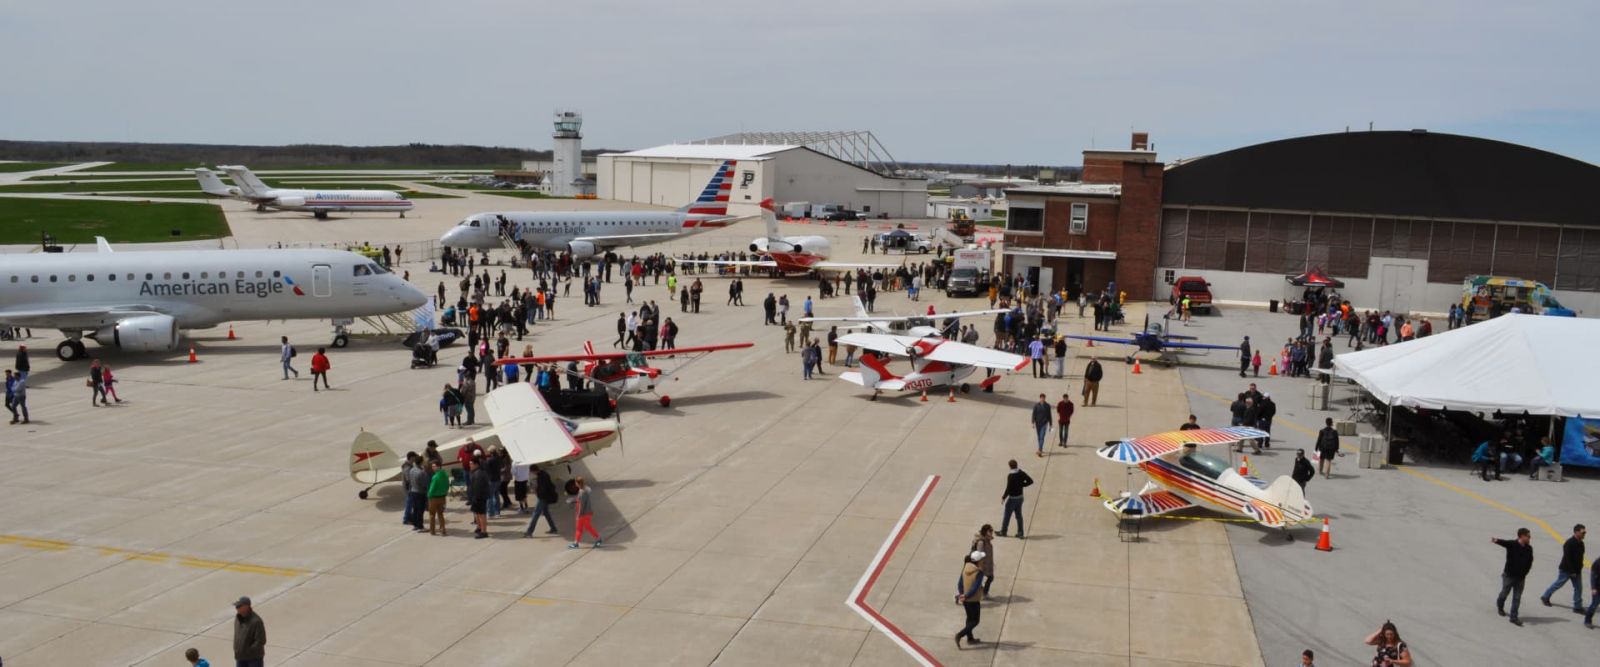 A variety of general aviation, airline and military aircraft were on display for the general public during Purdue Aviation Day in 2019. (Purdue University photo/John O’Malley)